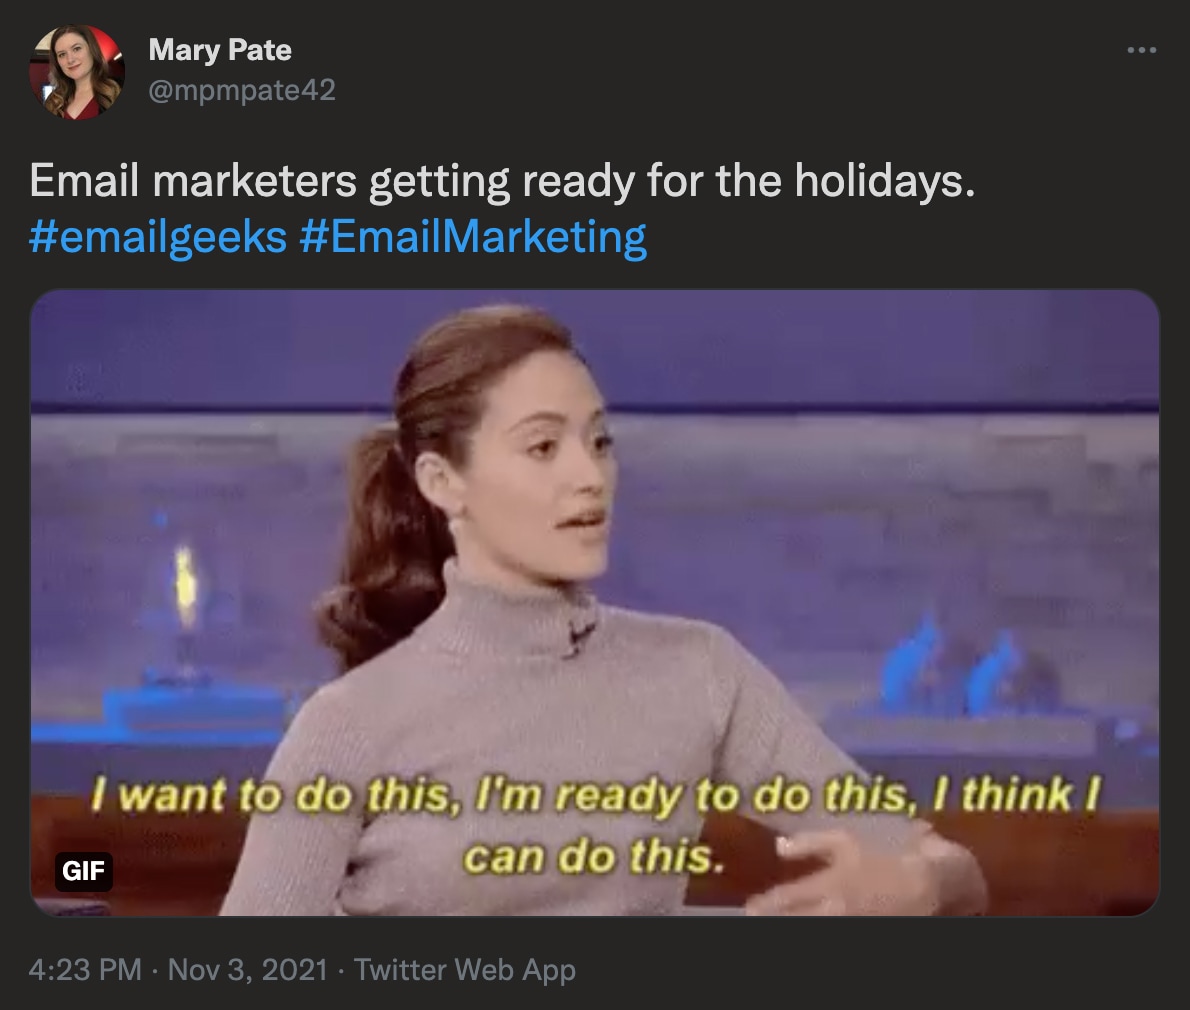 @mpmpate42 on twitter: Email marketers getting ready for the holidays. #emailgeeks #EmailMarketing